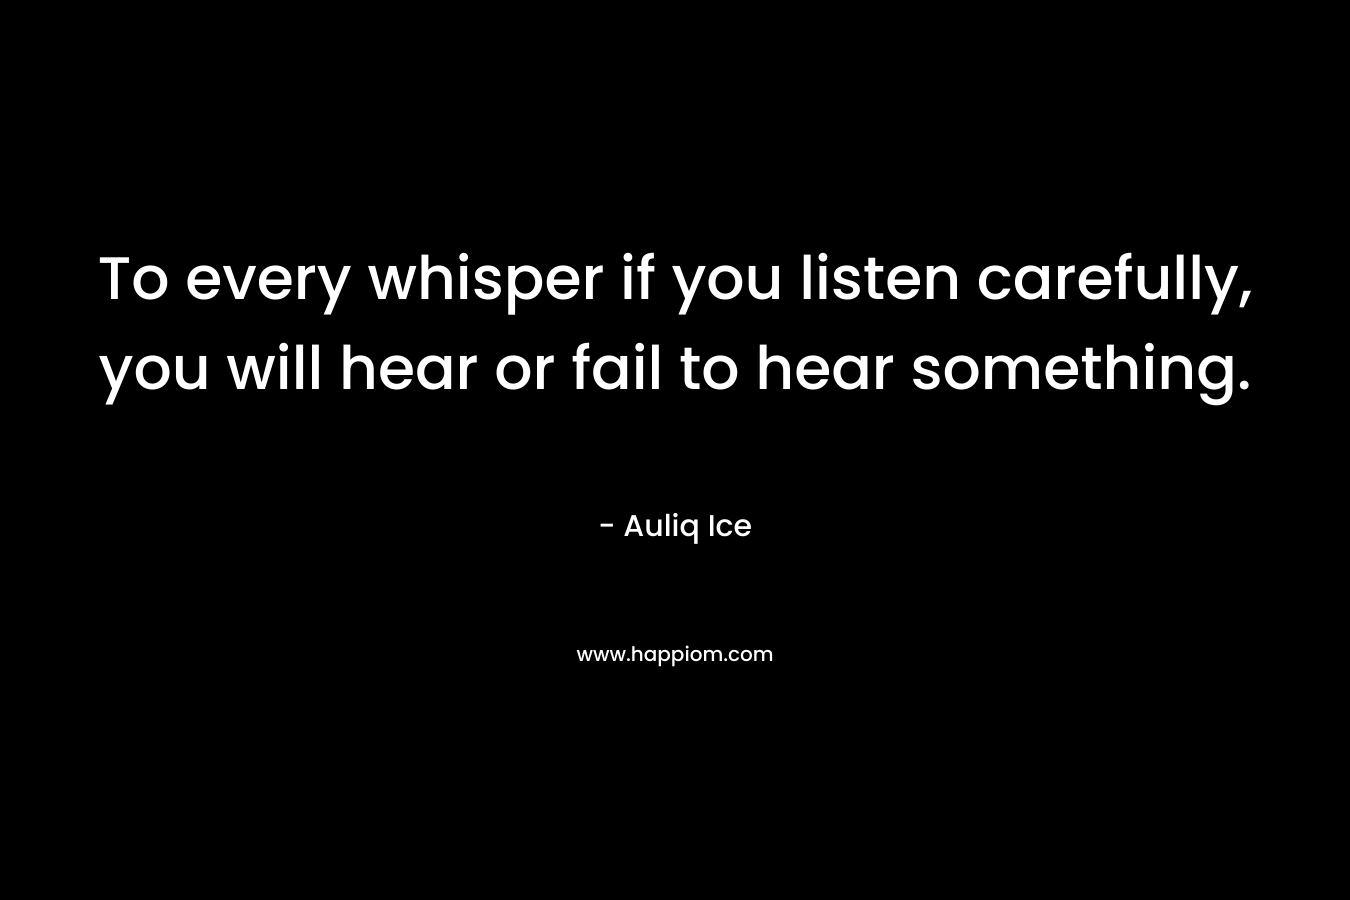 To every whisper if you listen carefully, you will hear or fail to hear something. – Auliq Ice